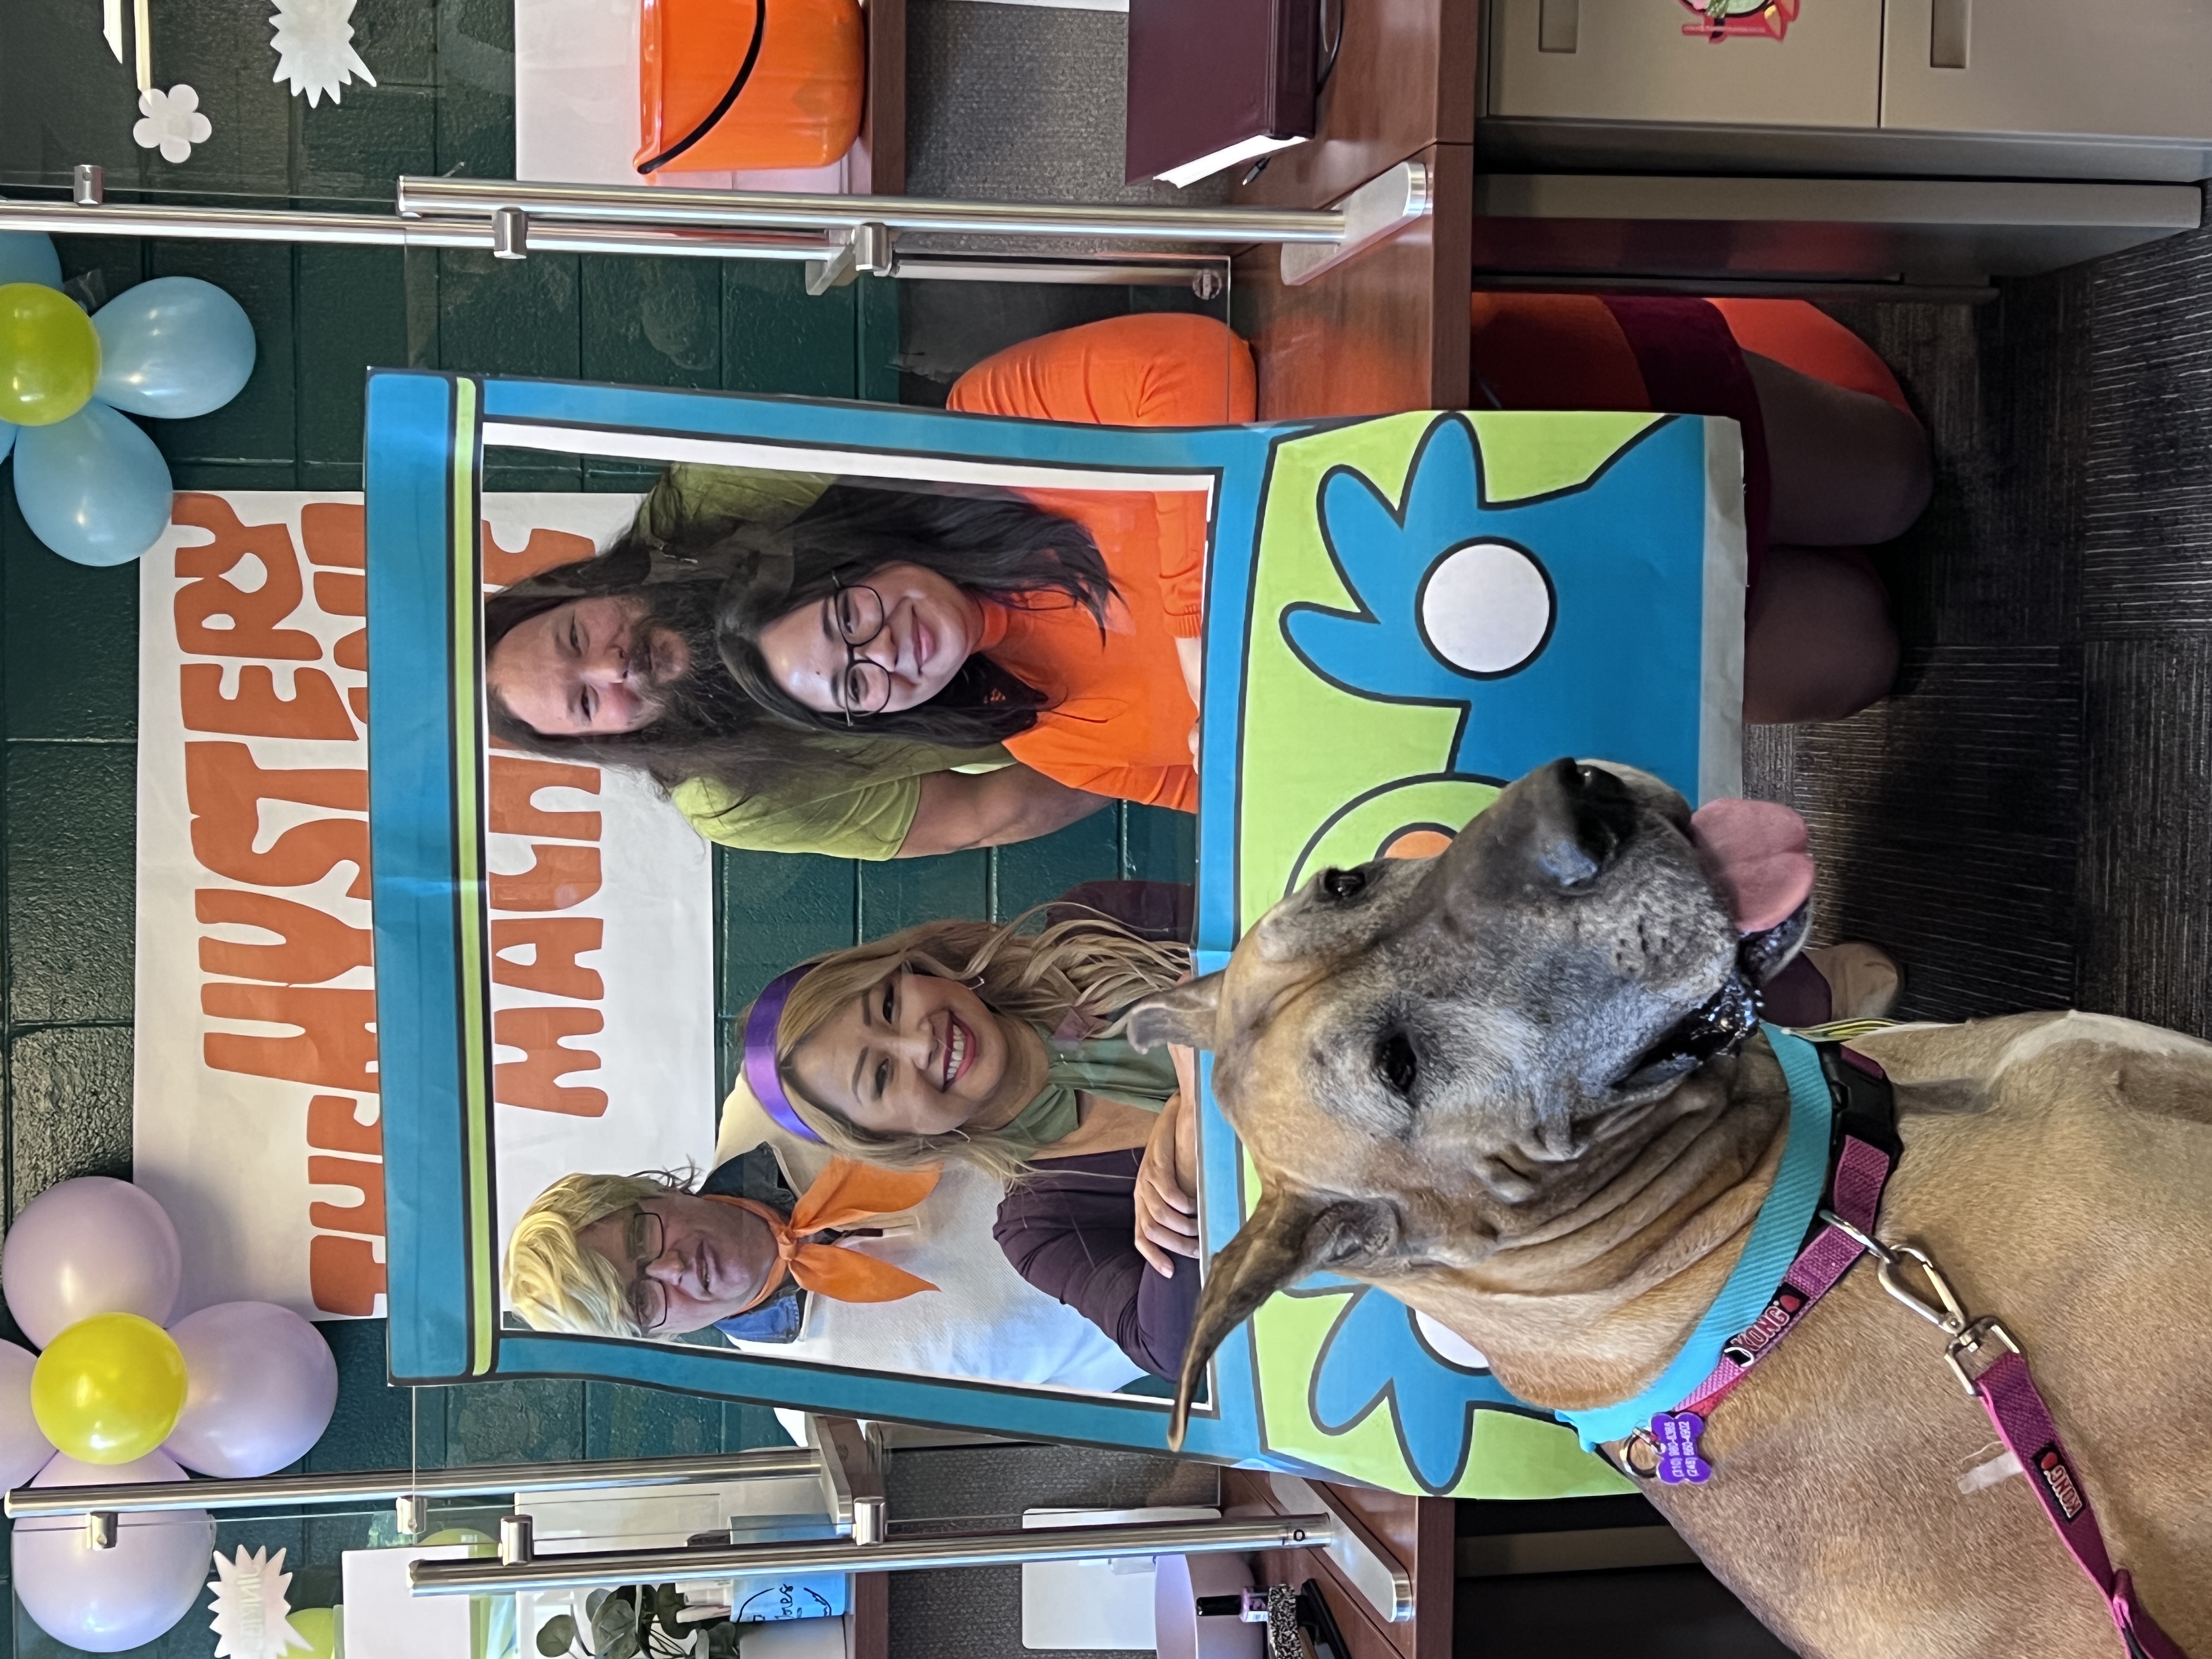 Facilities Management “Scooby Doo” group costume standing behind a photo frame and with a great dane dog in front